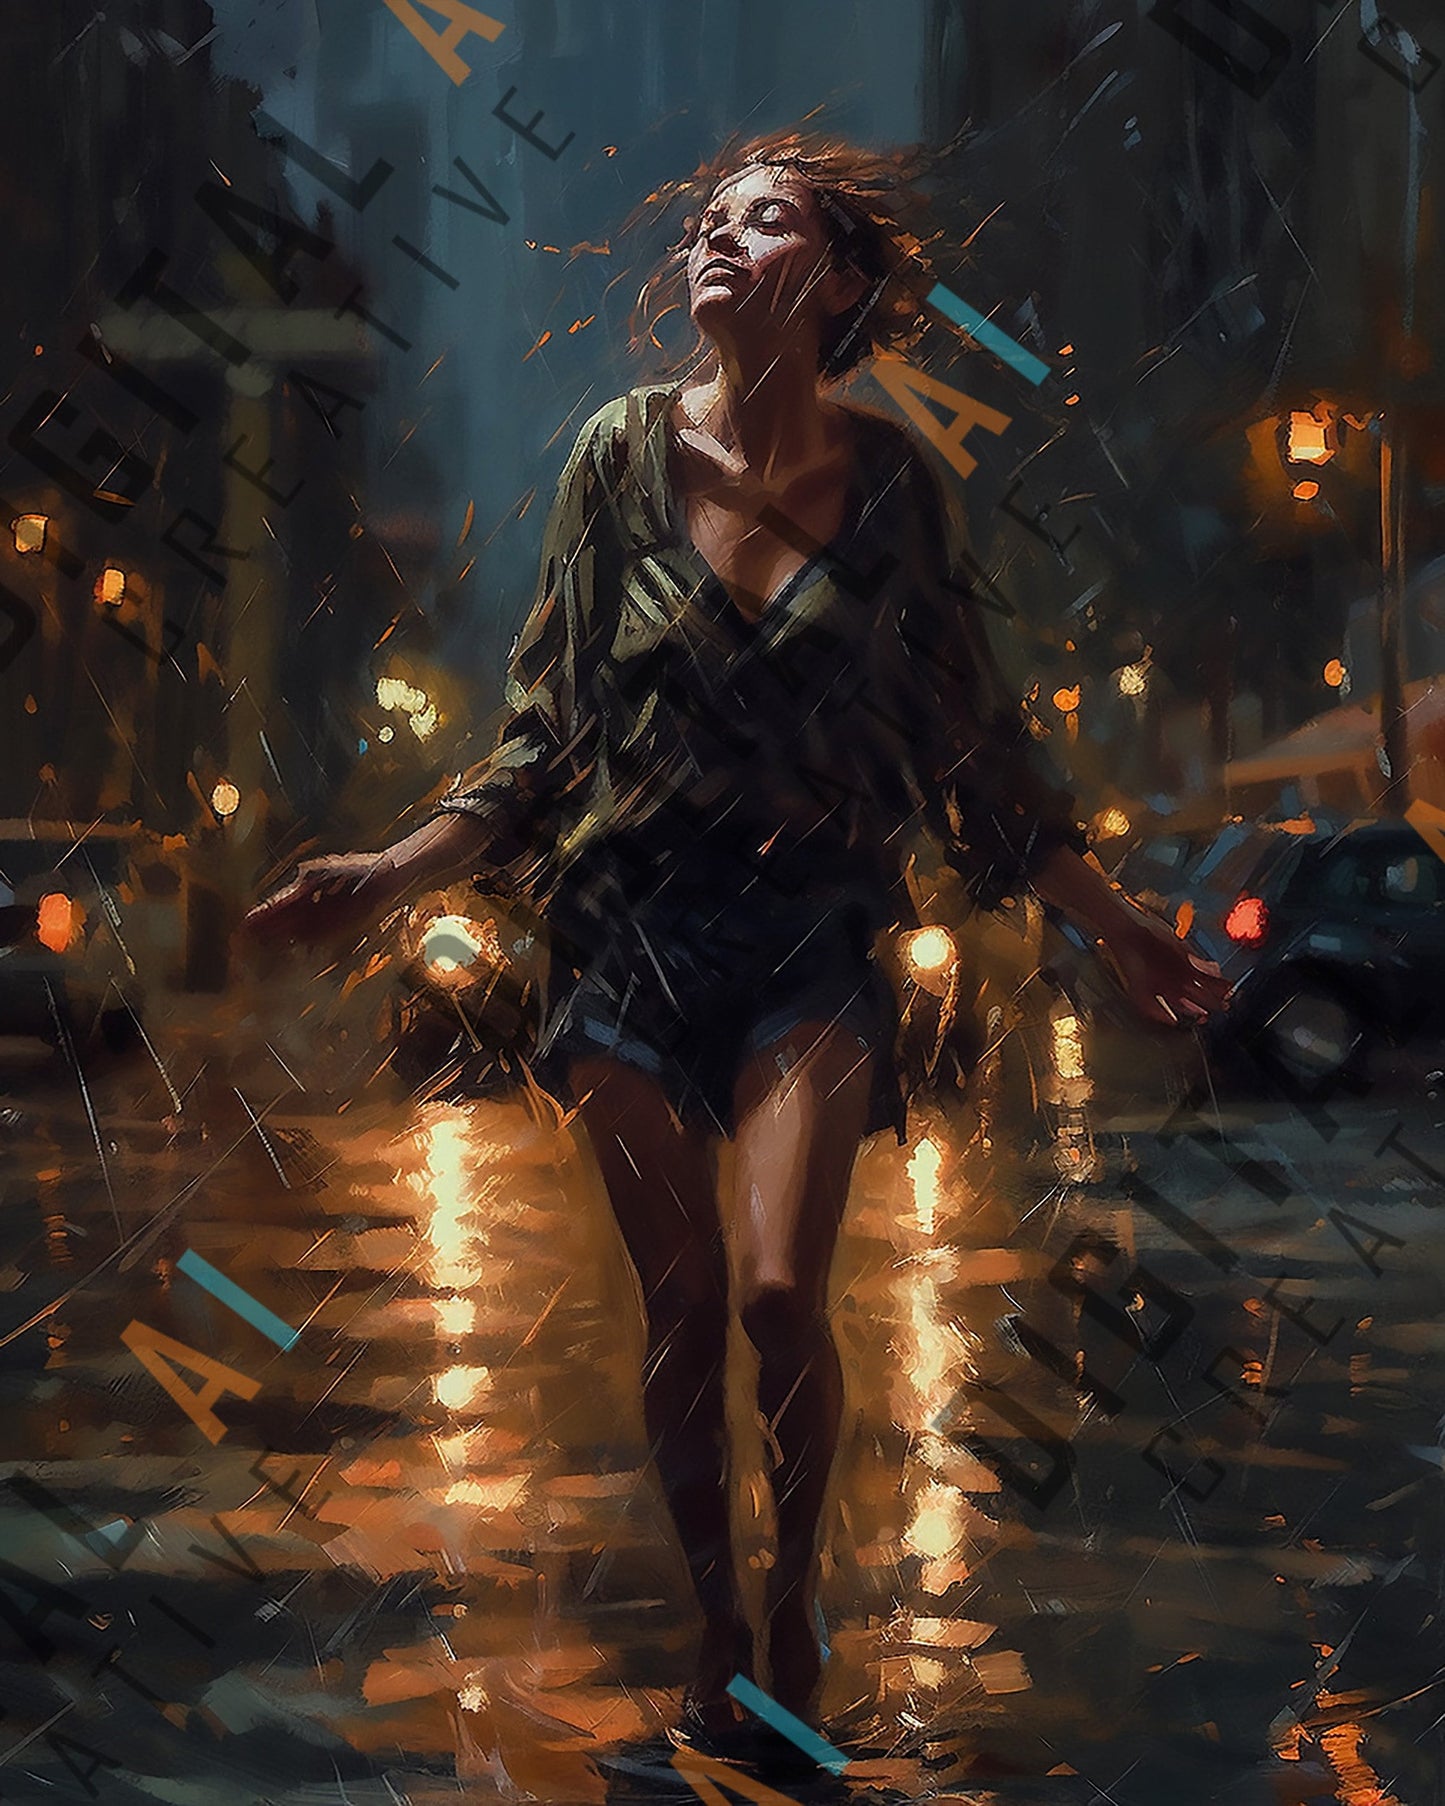 Digital Illustration Package - X4 Figurative Oil Painting - Girl Dancing in the Rain - 8736 x 4896 @300DPI